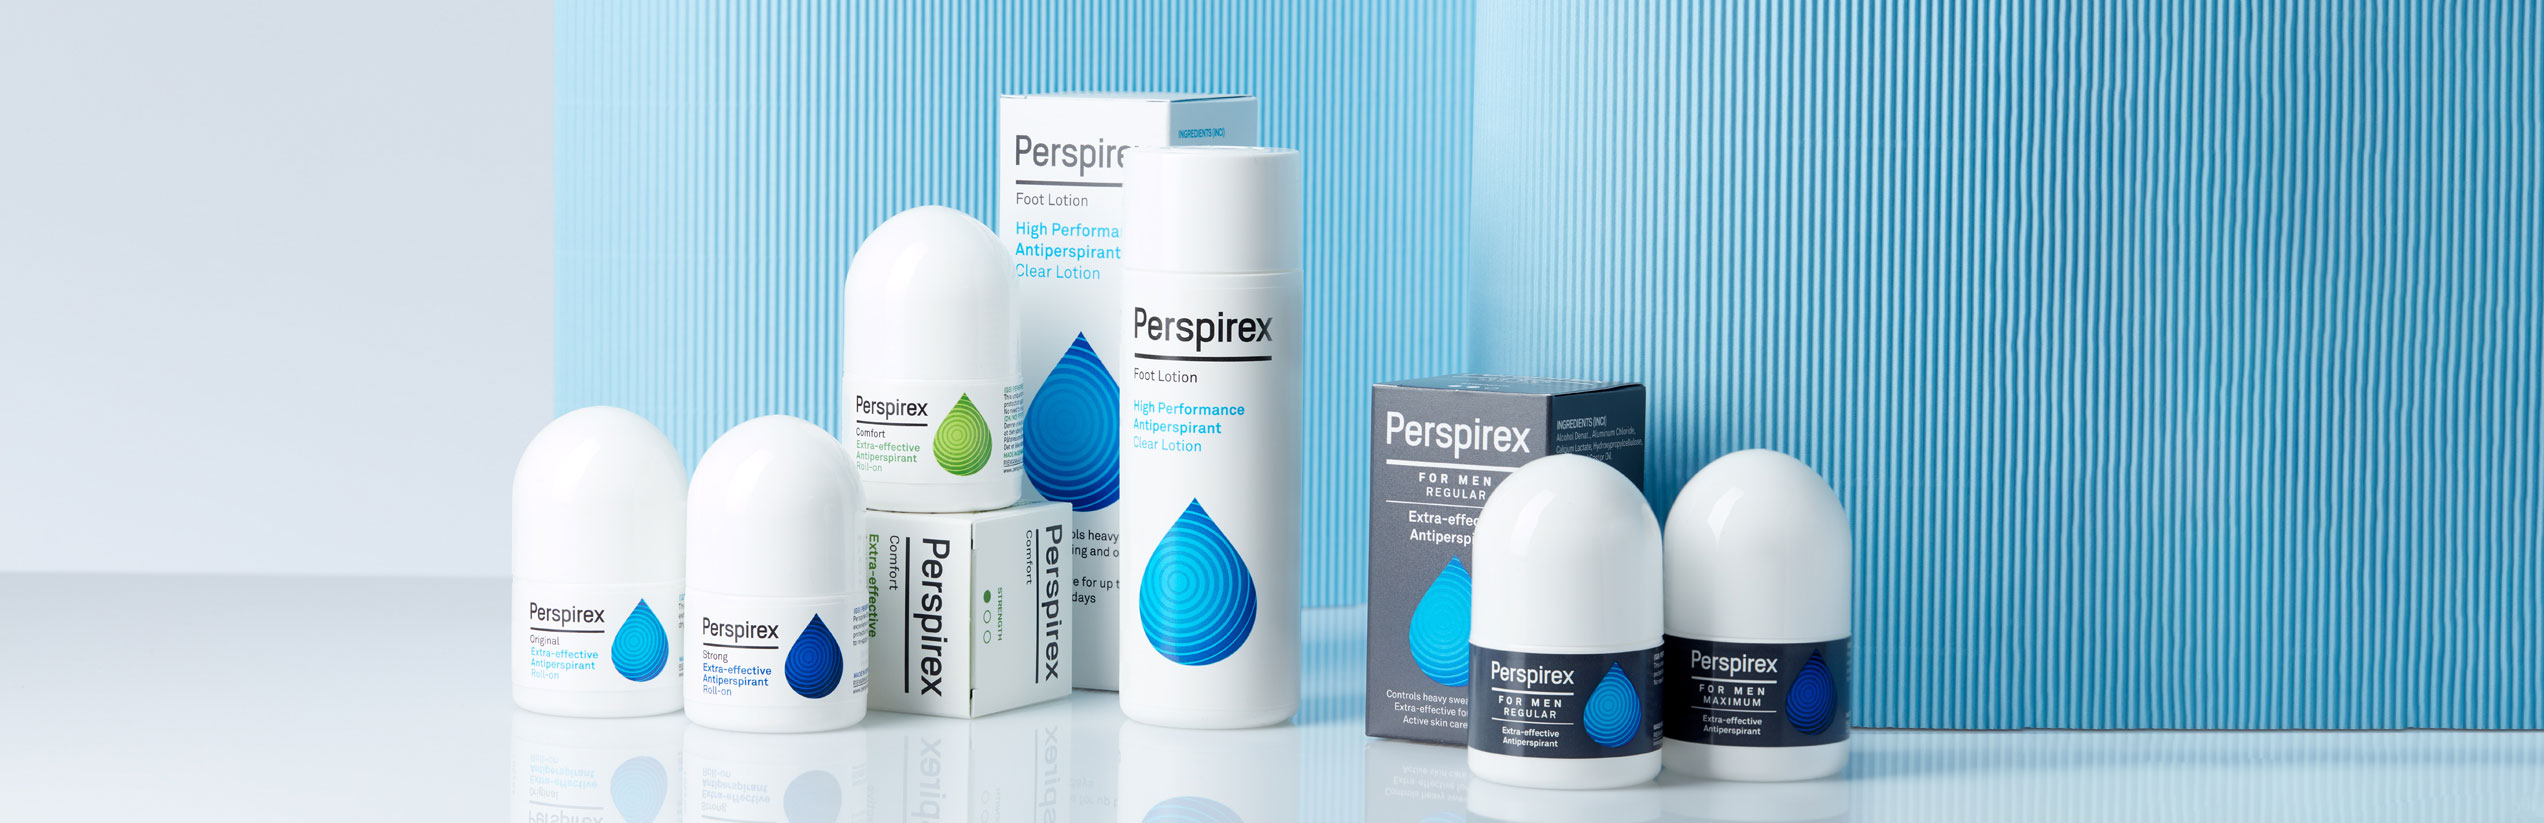 Products from Perspirex